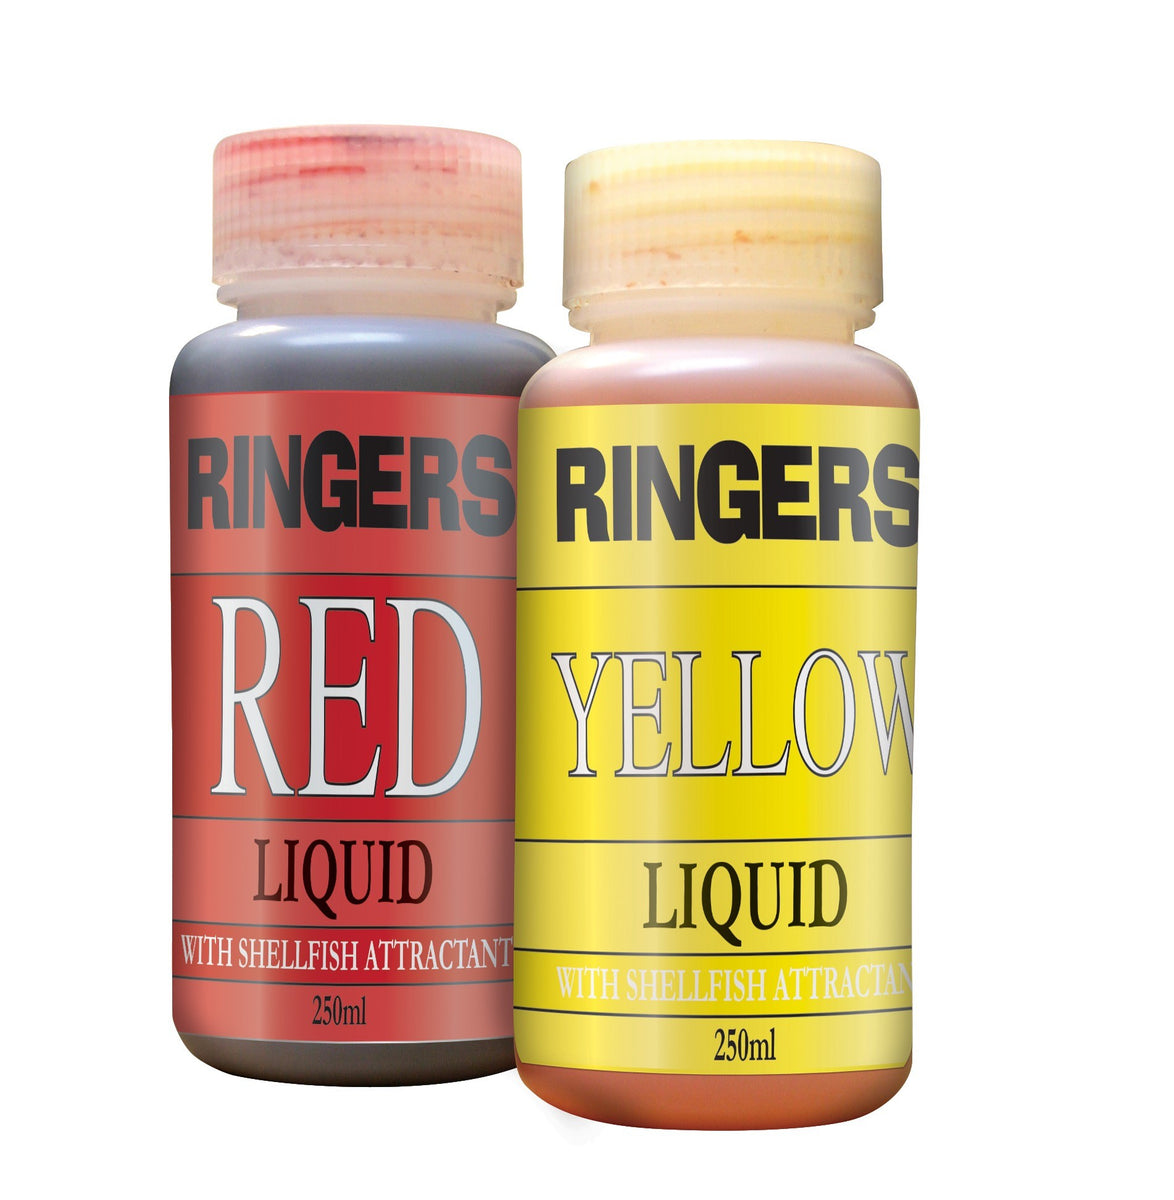 Ringers Red Liquid – Advanced Angling Solutions